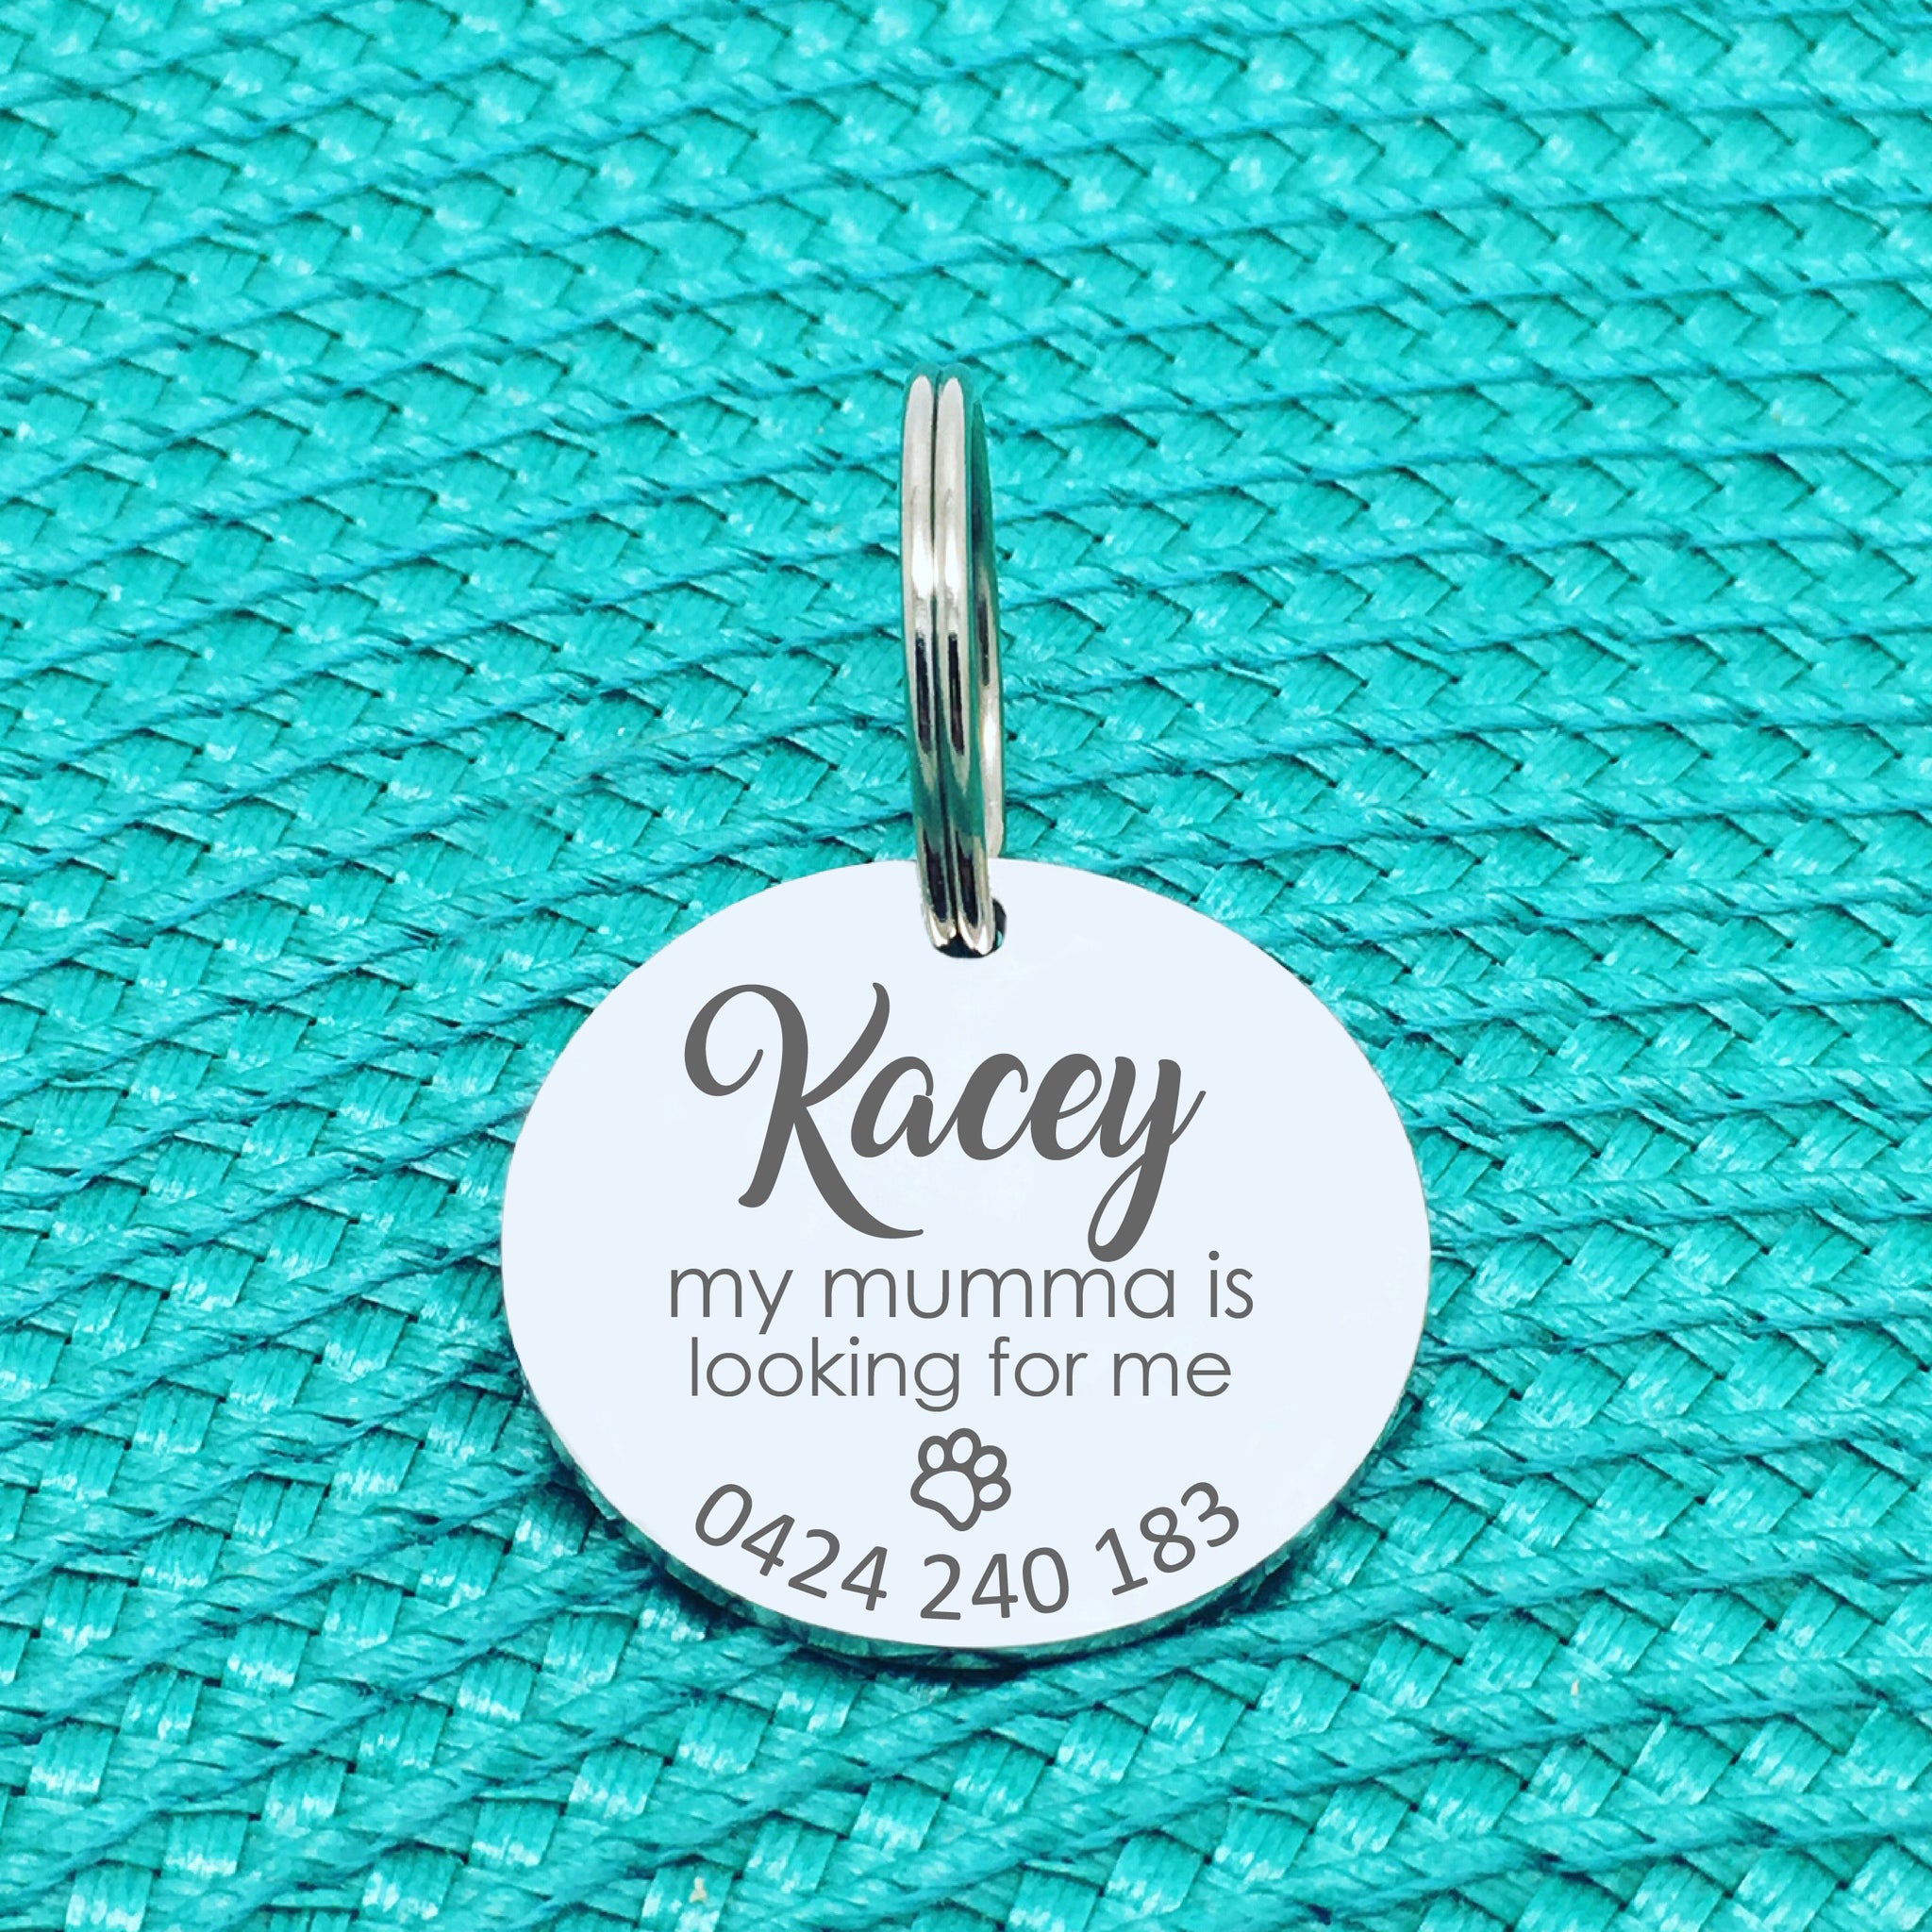 Personalised Pet Tag, My Mumma Is Looking For Me Design (Custom Engraved Dog Tag)